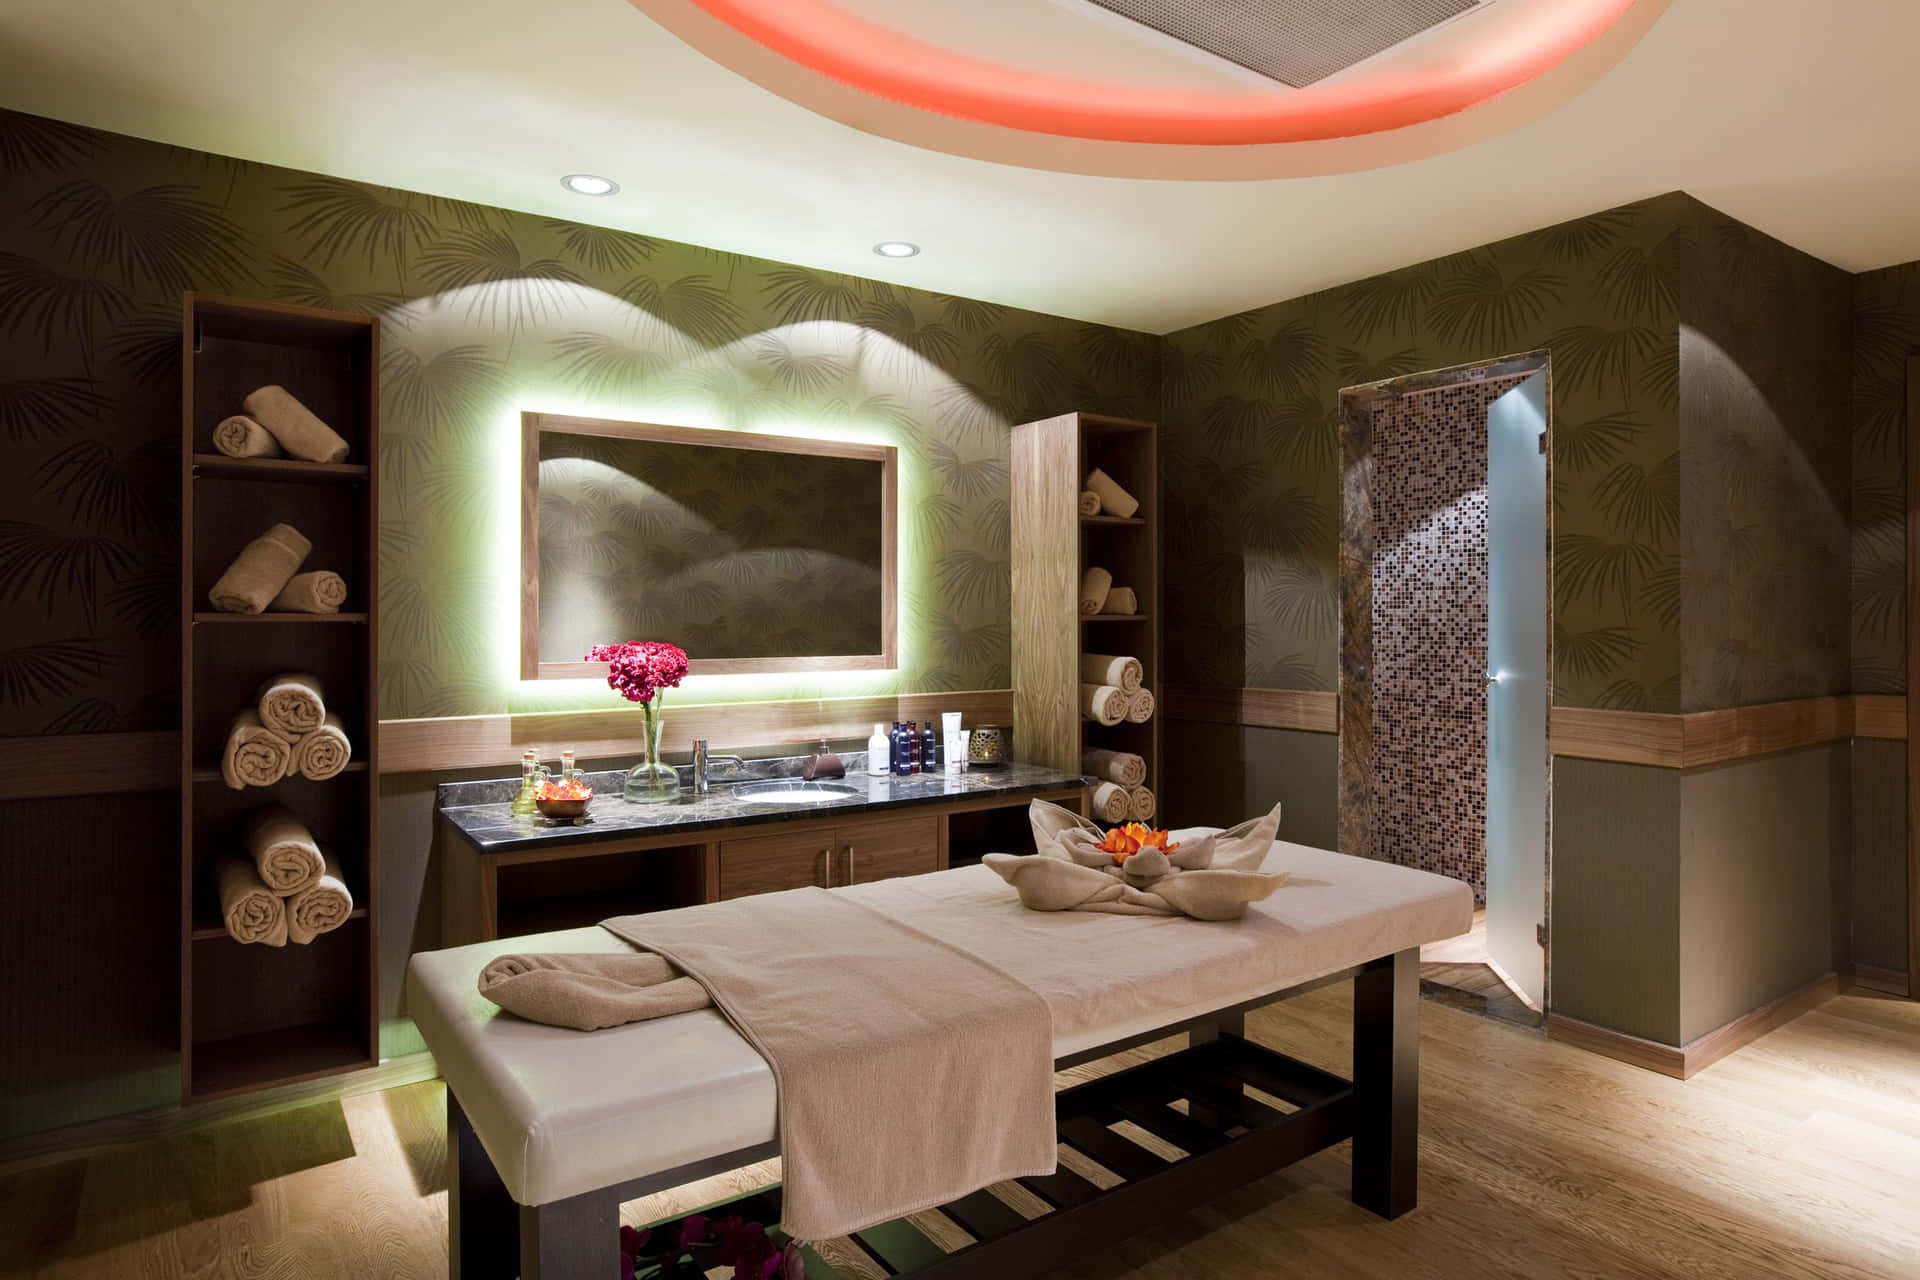 Take time out of your day for some rest and relaxation in our serene massage room.